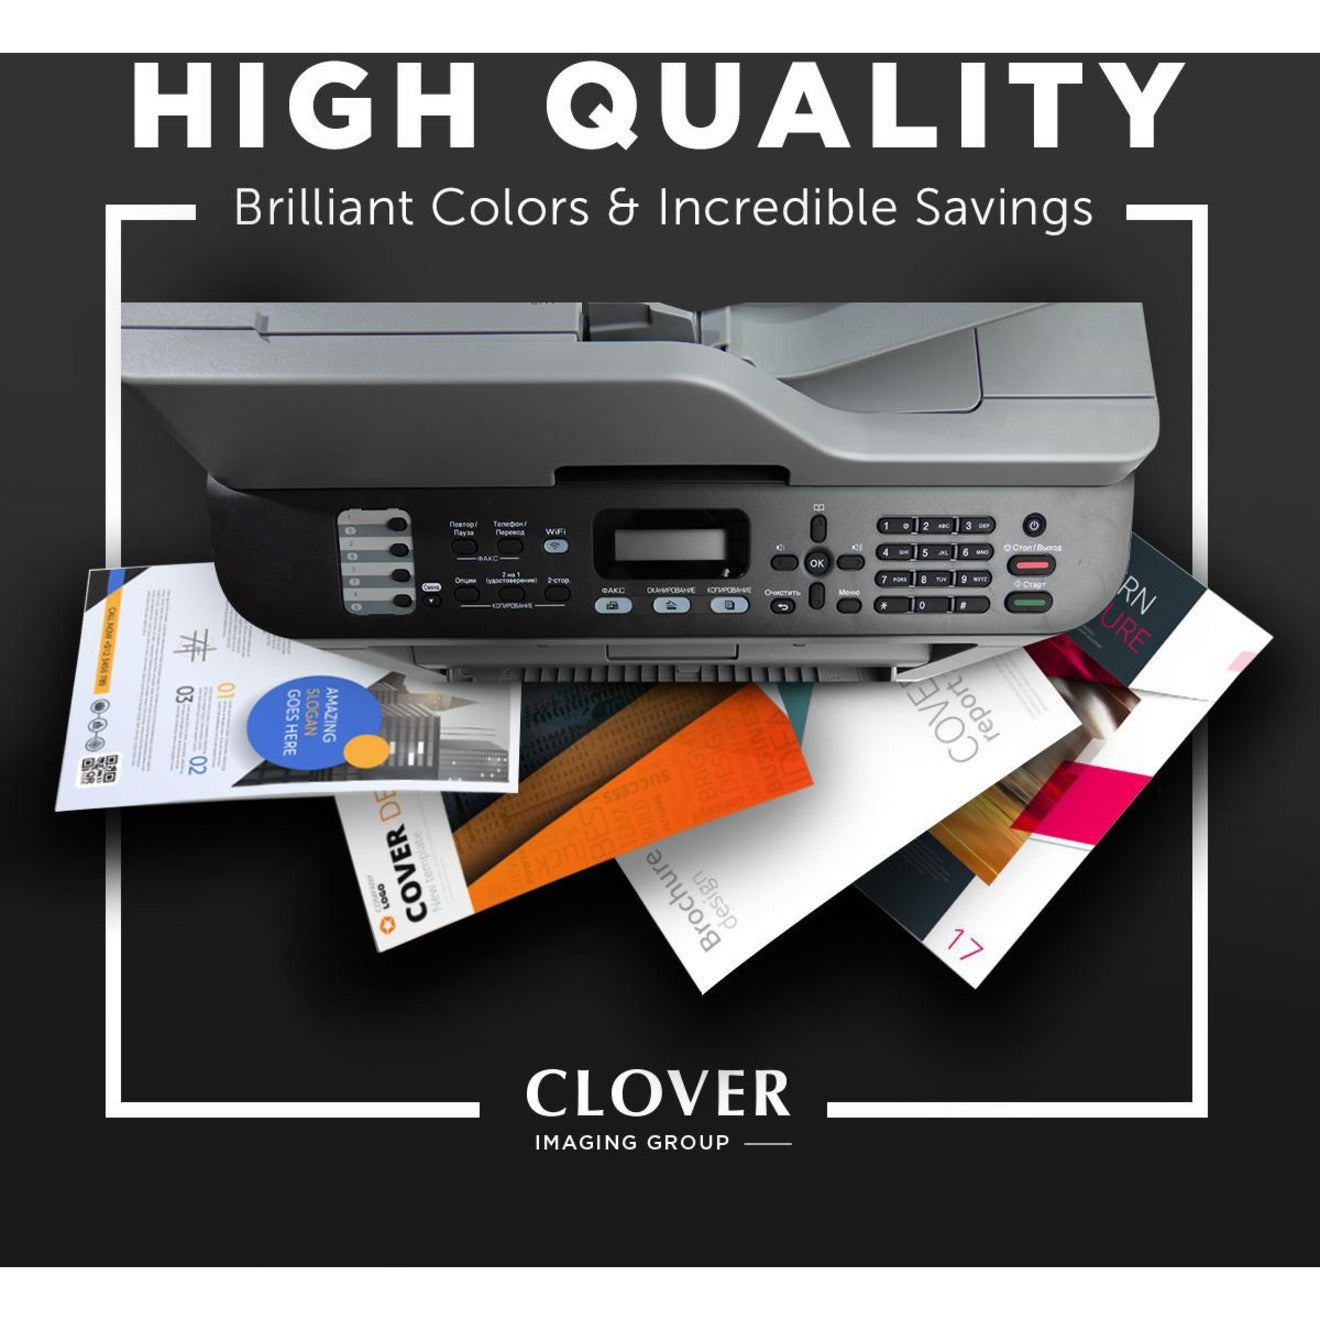 Clover Technologies Remanufactured Laser Toner Cartridge - Alternative for HP 204A (CF512A) - Yellow Pack